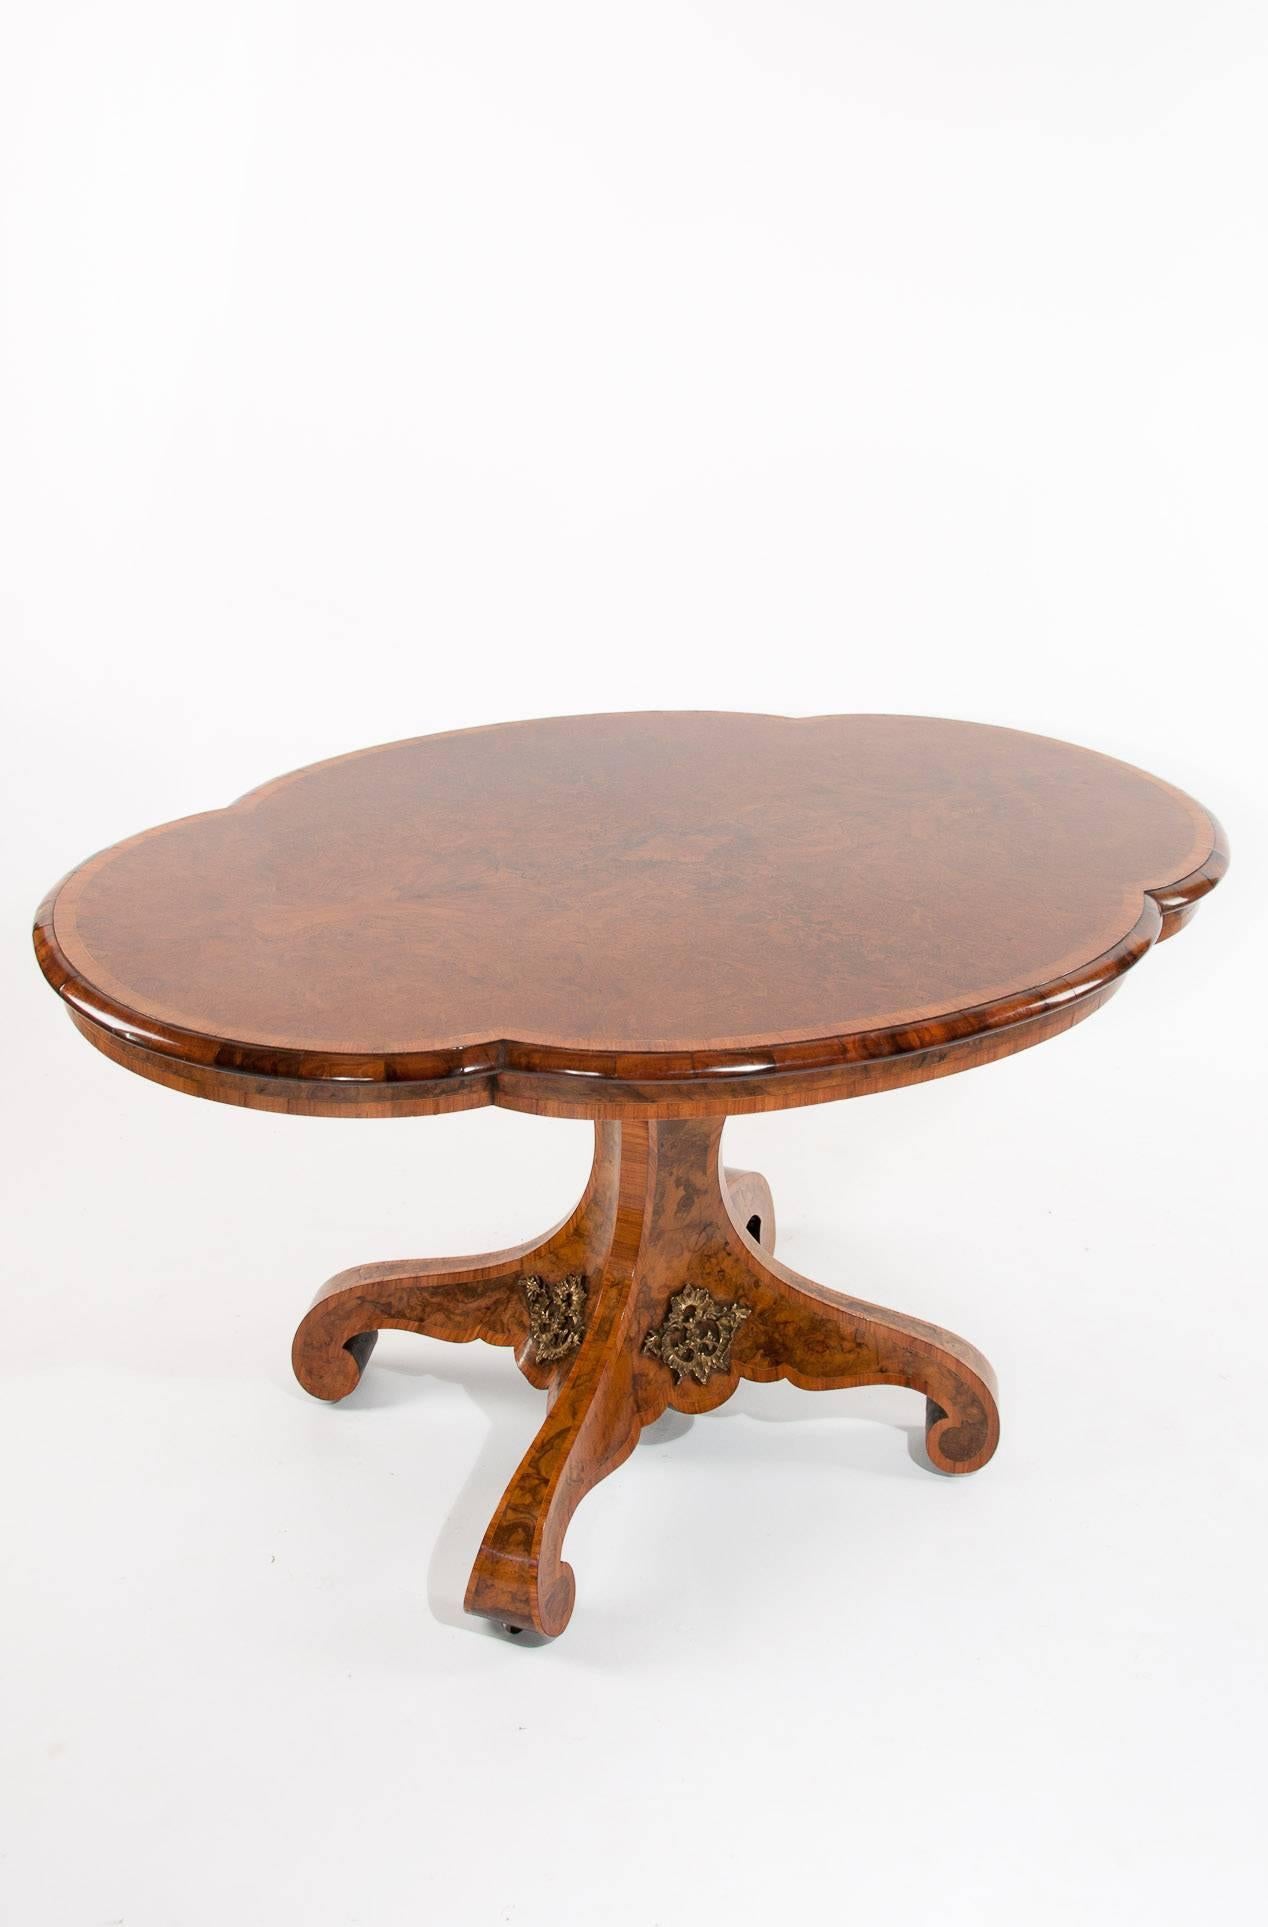 19th Century Burr Walnut Shaped Center Table In Excellent Condition In Benington, Herts